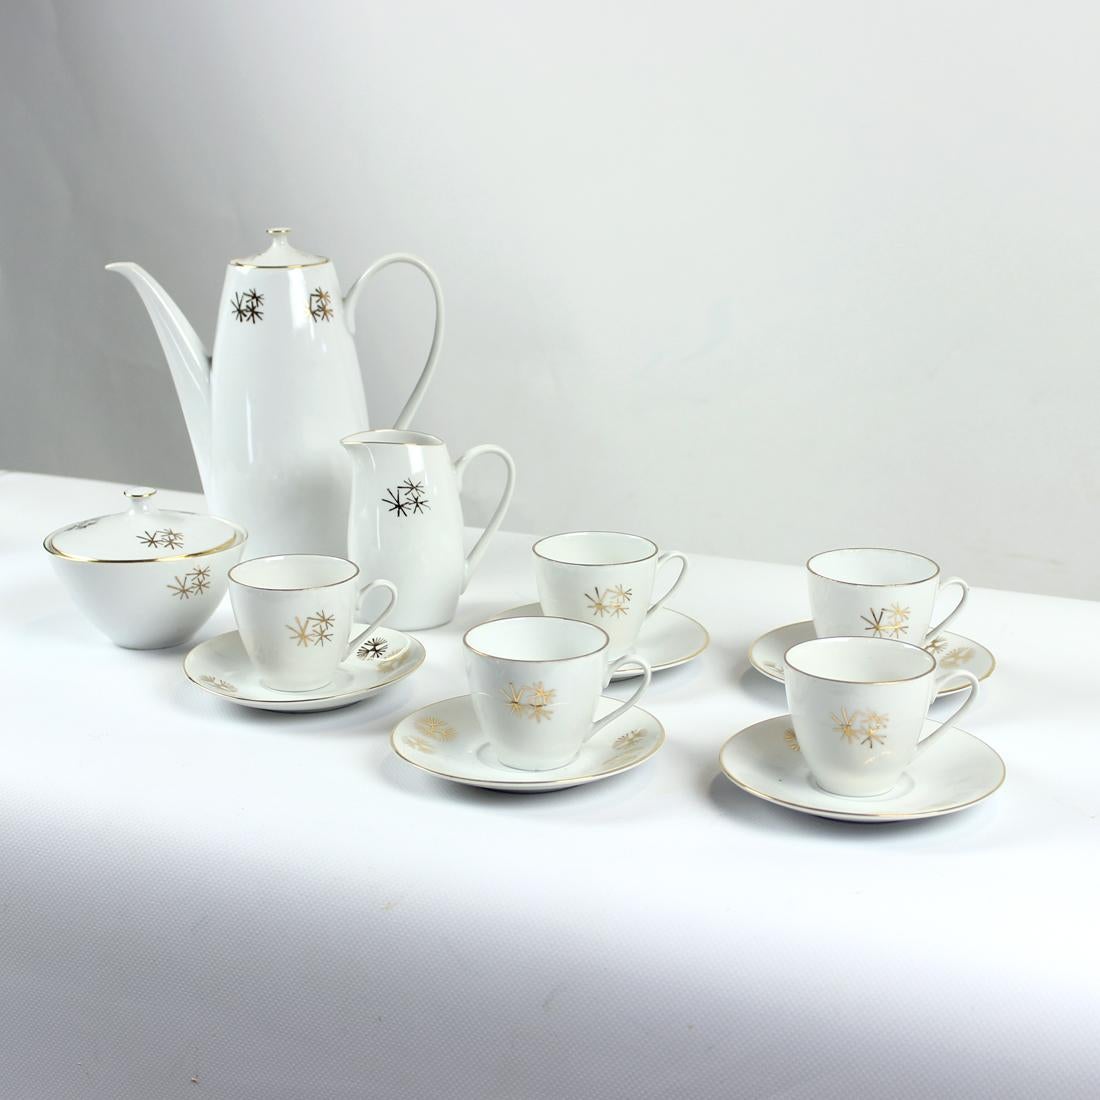 Beautiful tea and coffee set in white porcelain with gold marks as a decoration. Produced in Czechoslovakia in Nova role, original mark still visible. Original catalogue mark aproved by catalogues. The set is trully elegant with typical mid-century